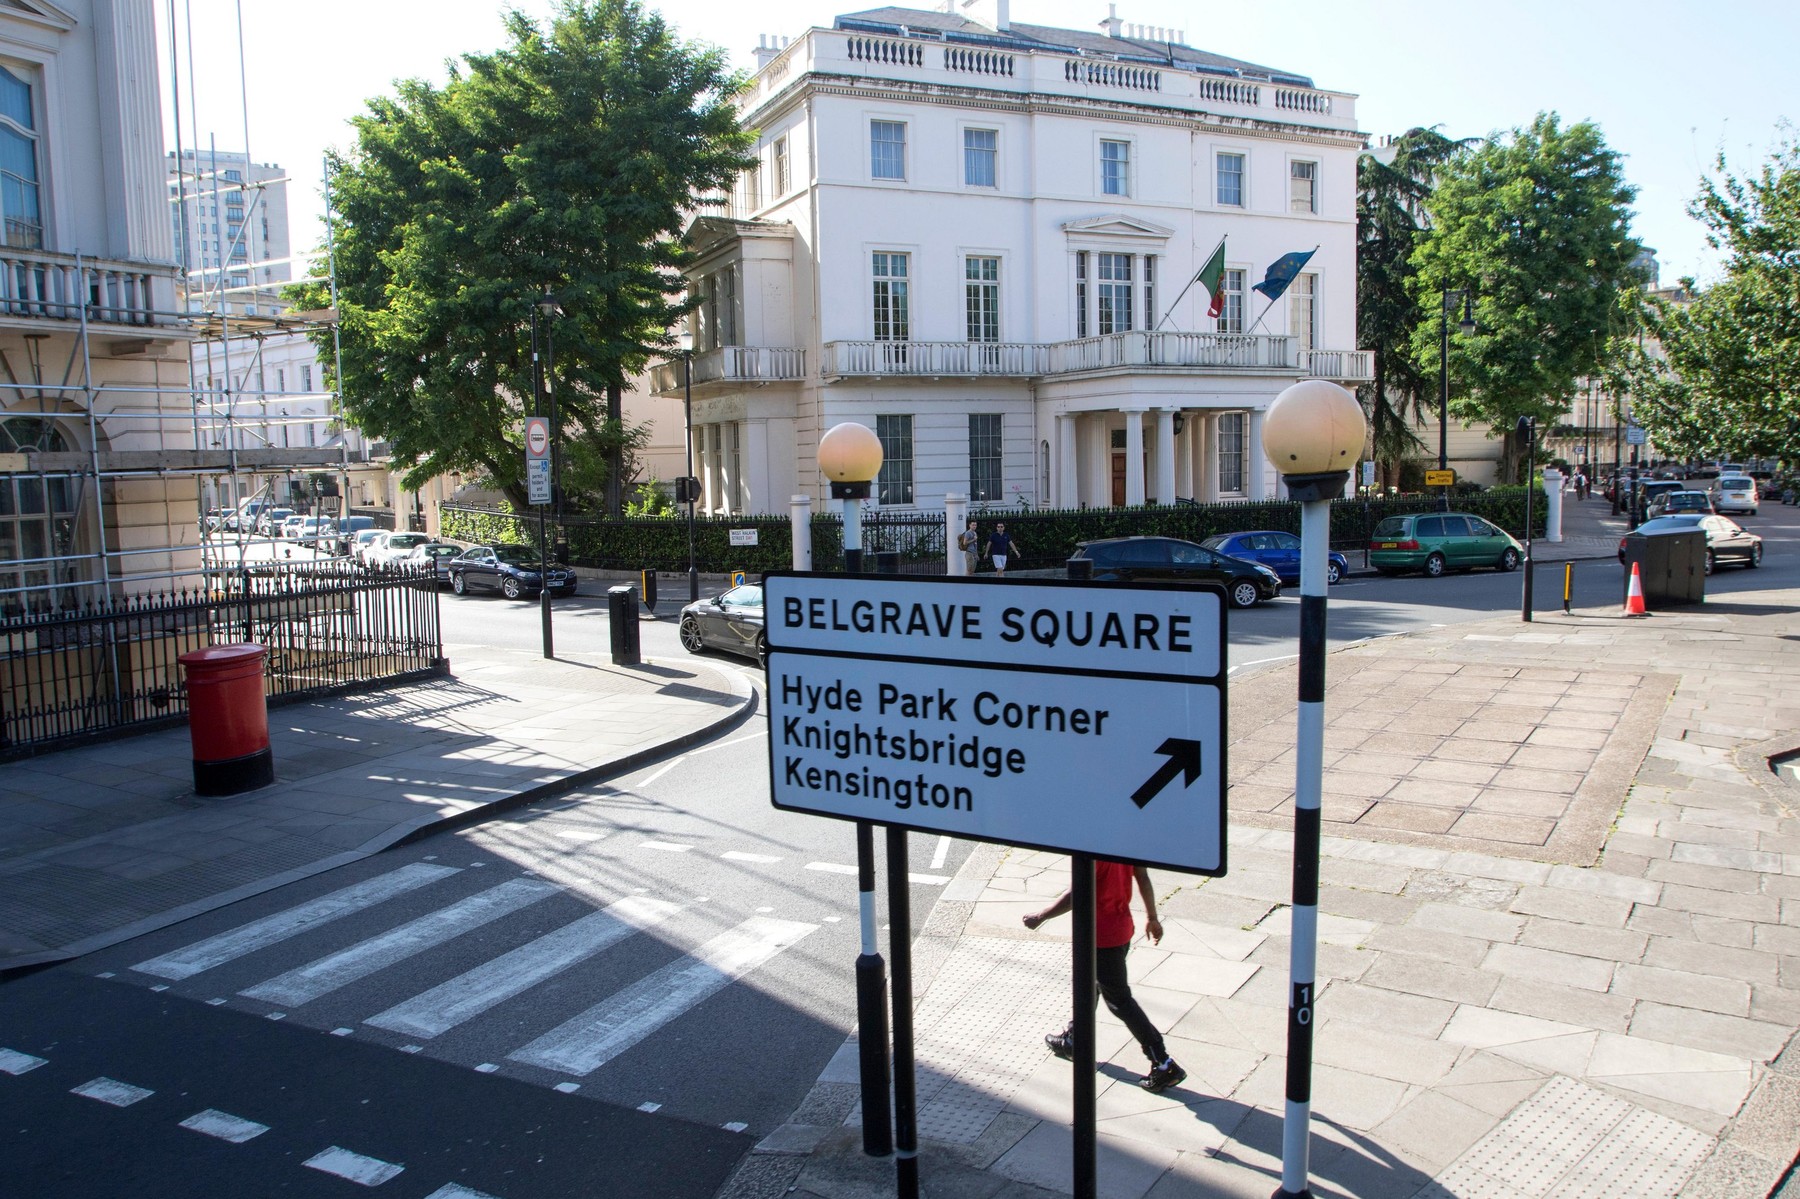 Belgrave Square, Belgravia district in West London in the City of Westminster and the Royal Borough of Kensington and Chelsea